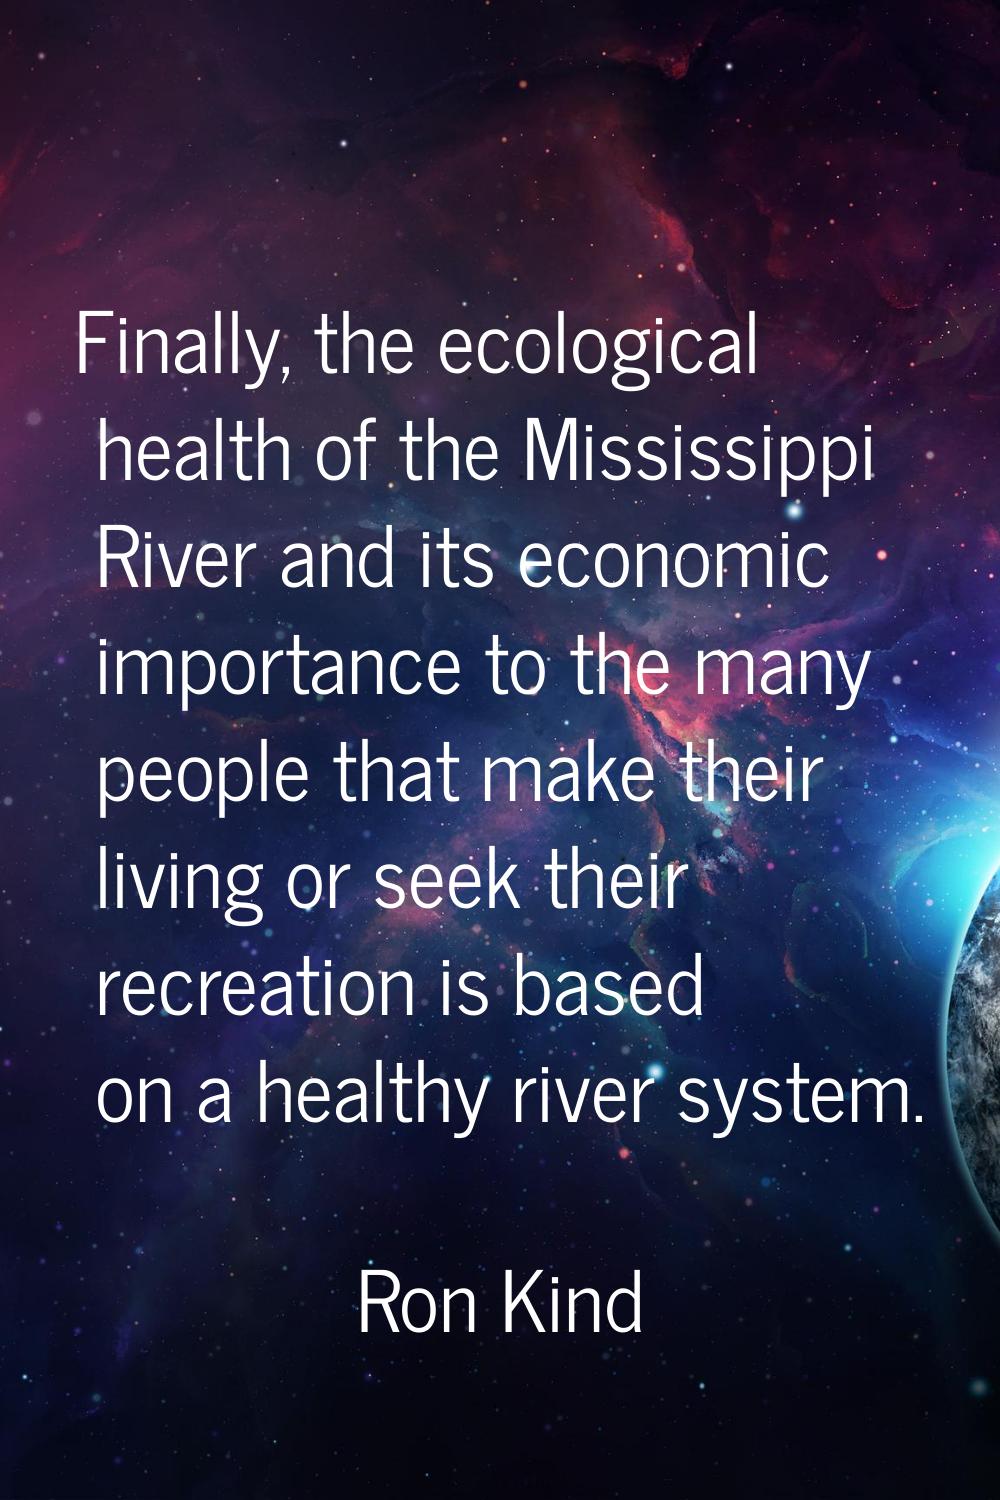 Finally, the ecological health of the Mississippi River and its economic importance to the many peo